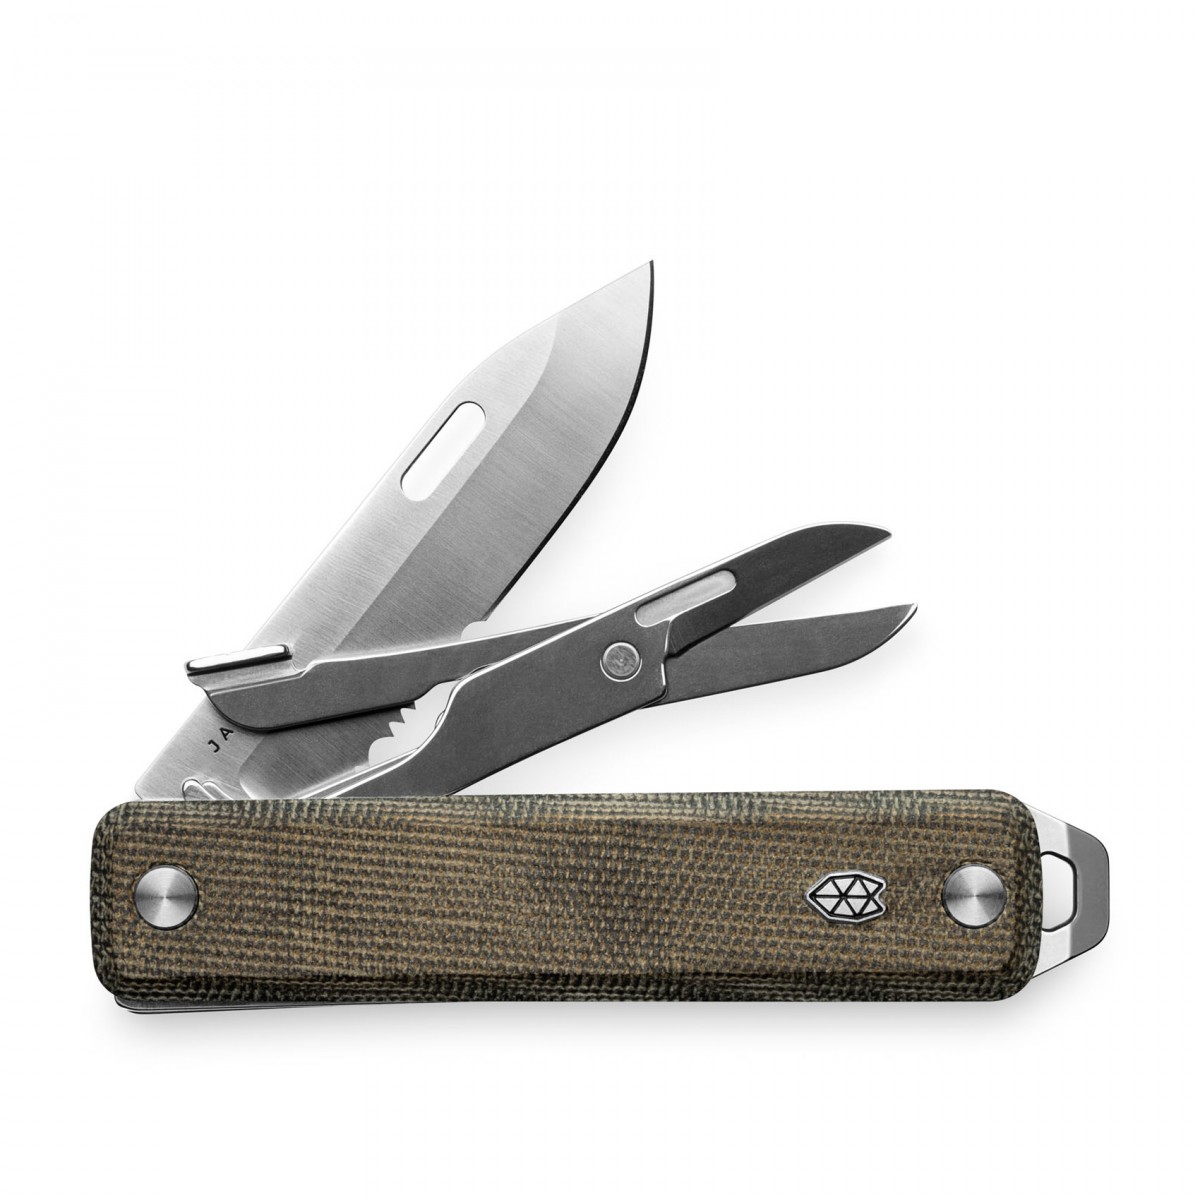 James Brand Elko knife review - a mini pocket knife with extra features -  The Gadgeteer